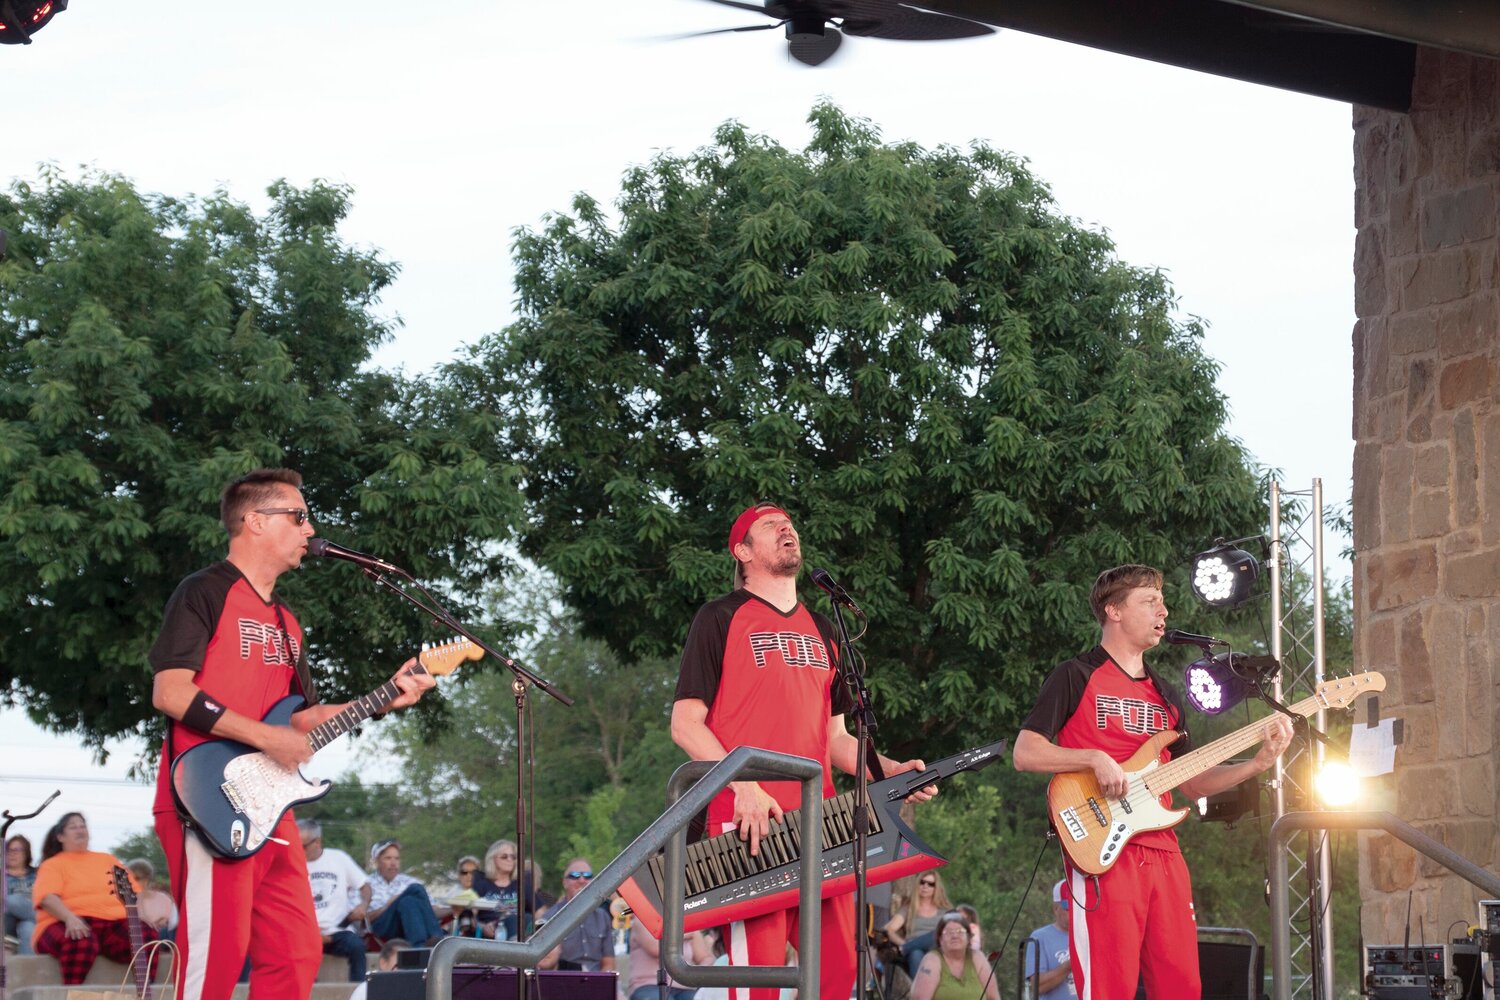 Azle favorite Poo Live Crew opened this season's Music in the Park